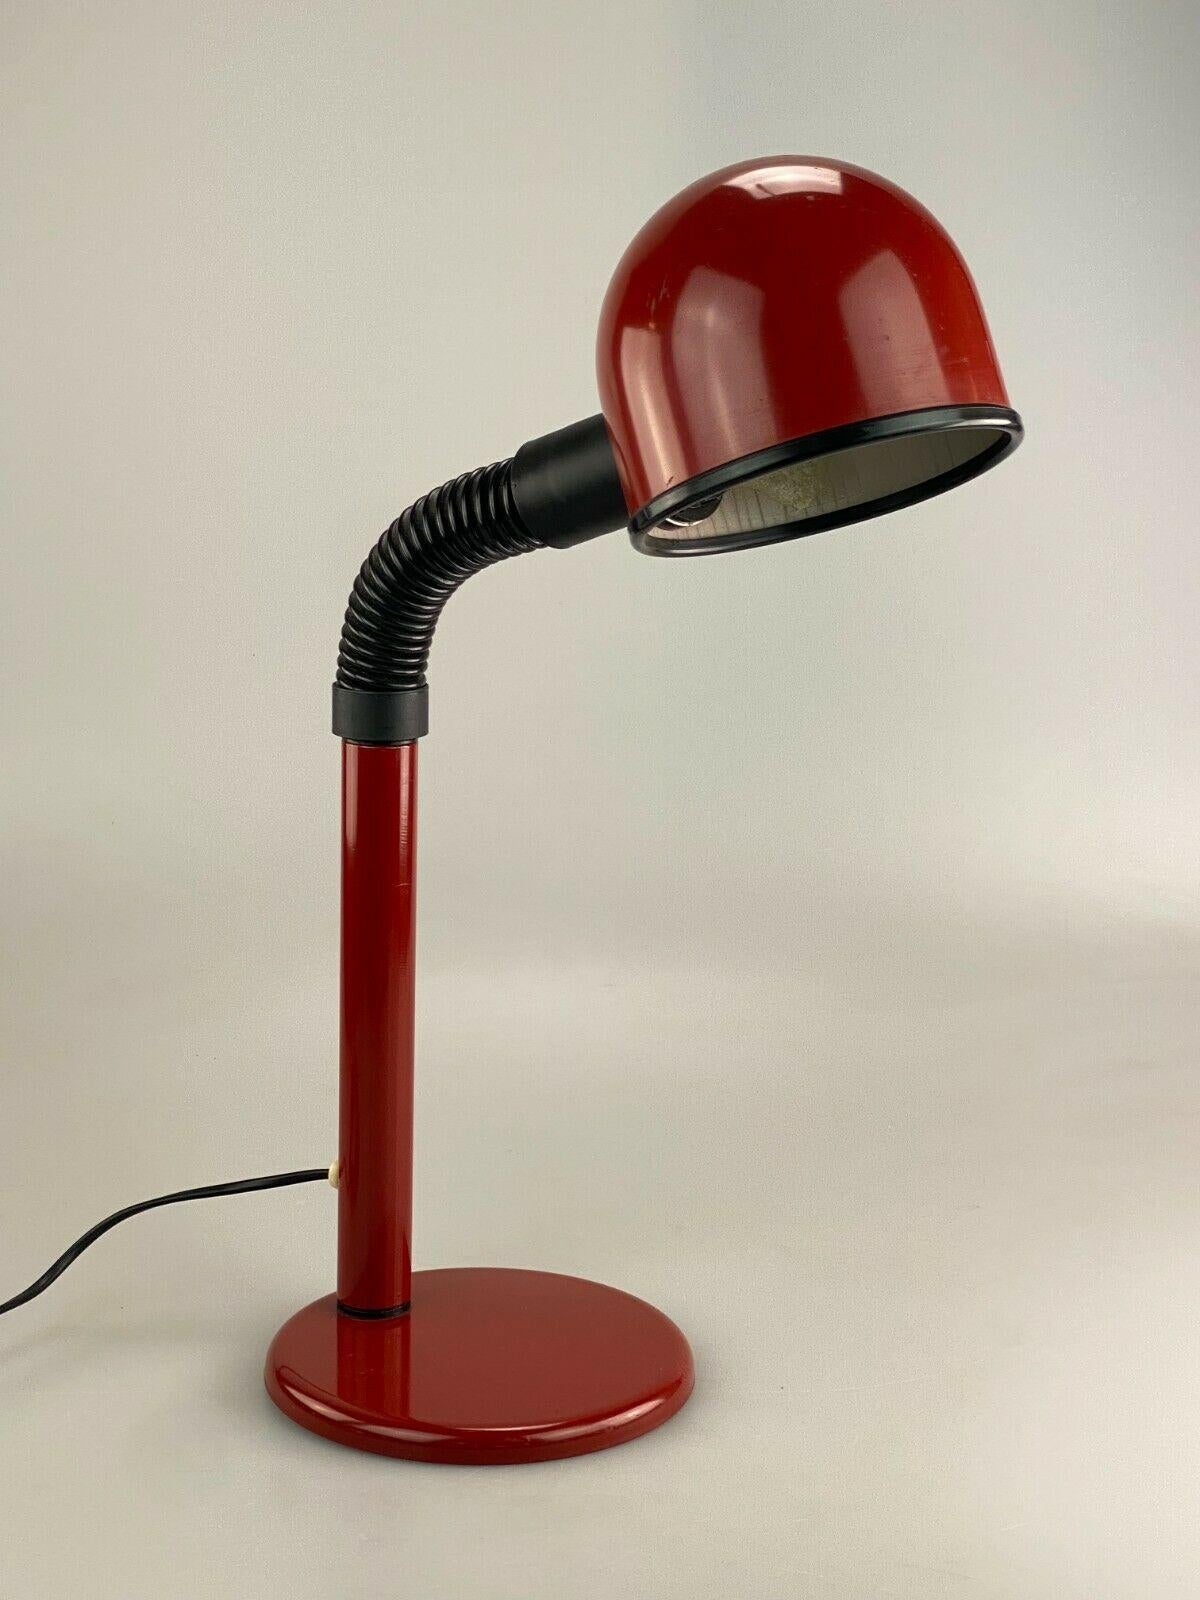 60s 70s ball lamp lamp light red table lamp Space Age Design 60s 70s

Object: spherical lamp

Manufacturer:

Condition: good - vintage

Age: around 1960-1970

Dimensions:

46cm x 34cm x 18cm

Other notes:

The pictures serve as part